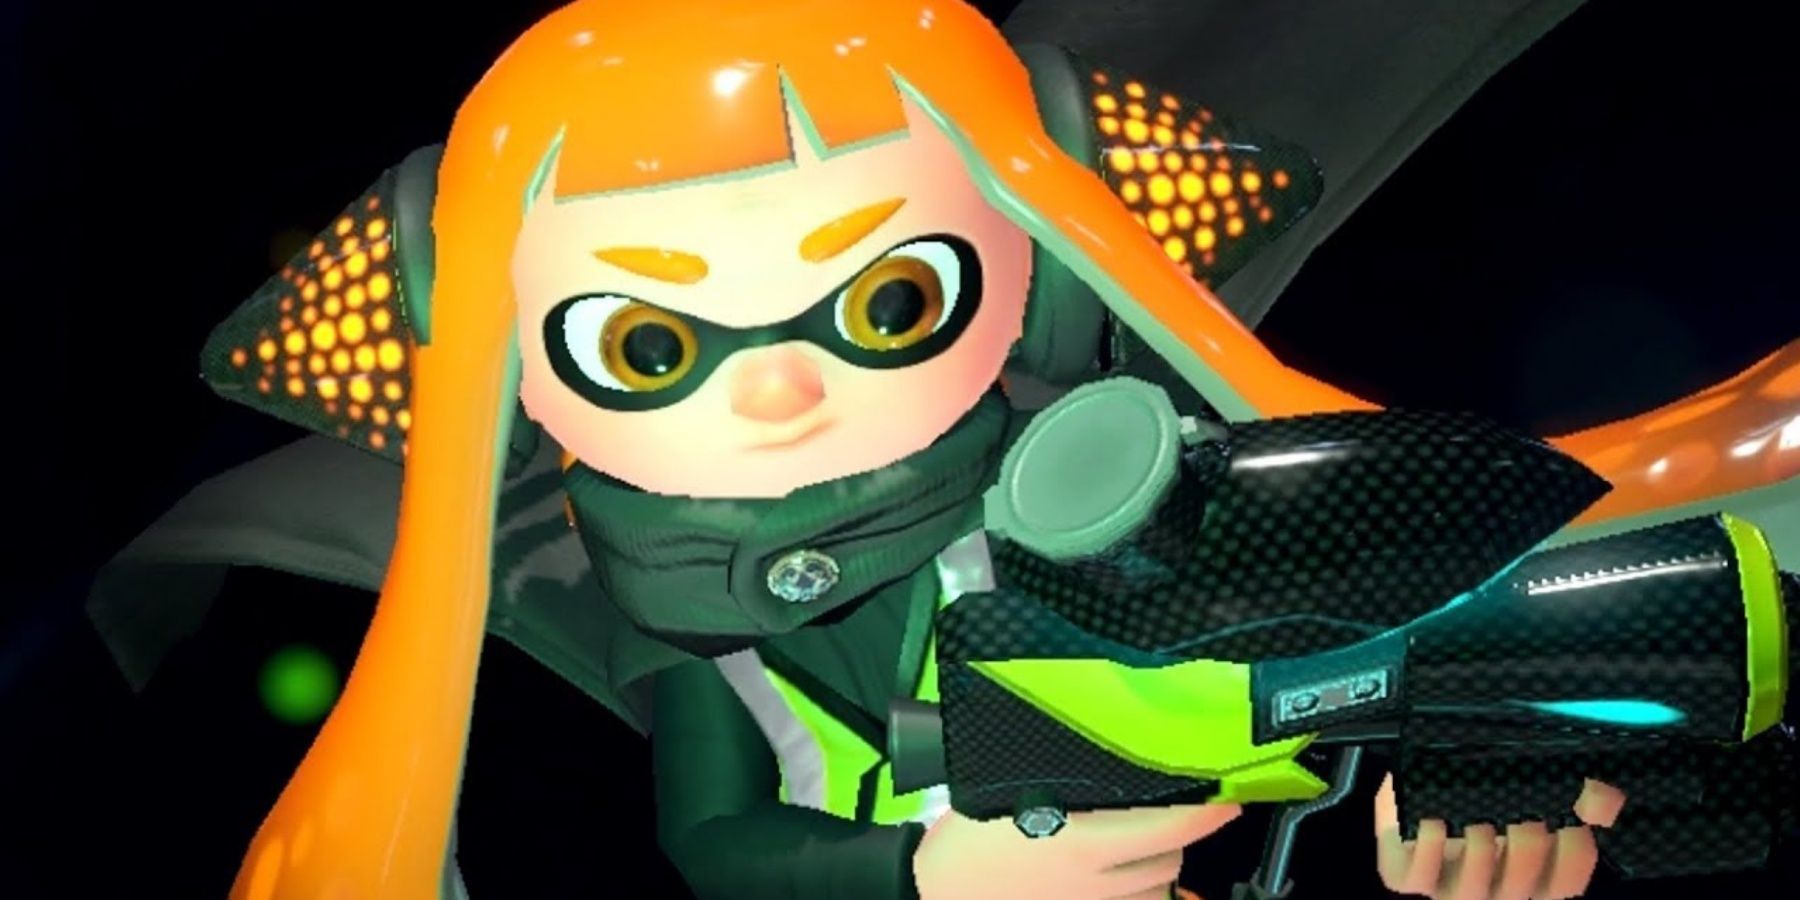 Inner Agent 3, a character with ginger hair and spikes coming from their head, in Splatoon 2